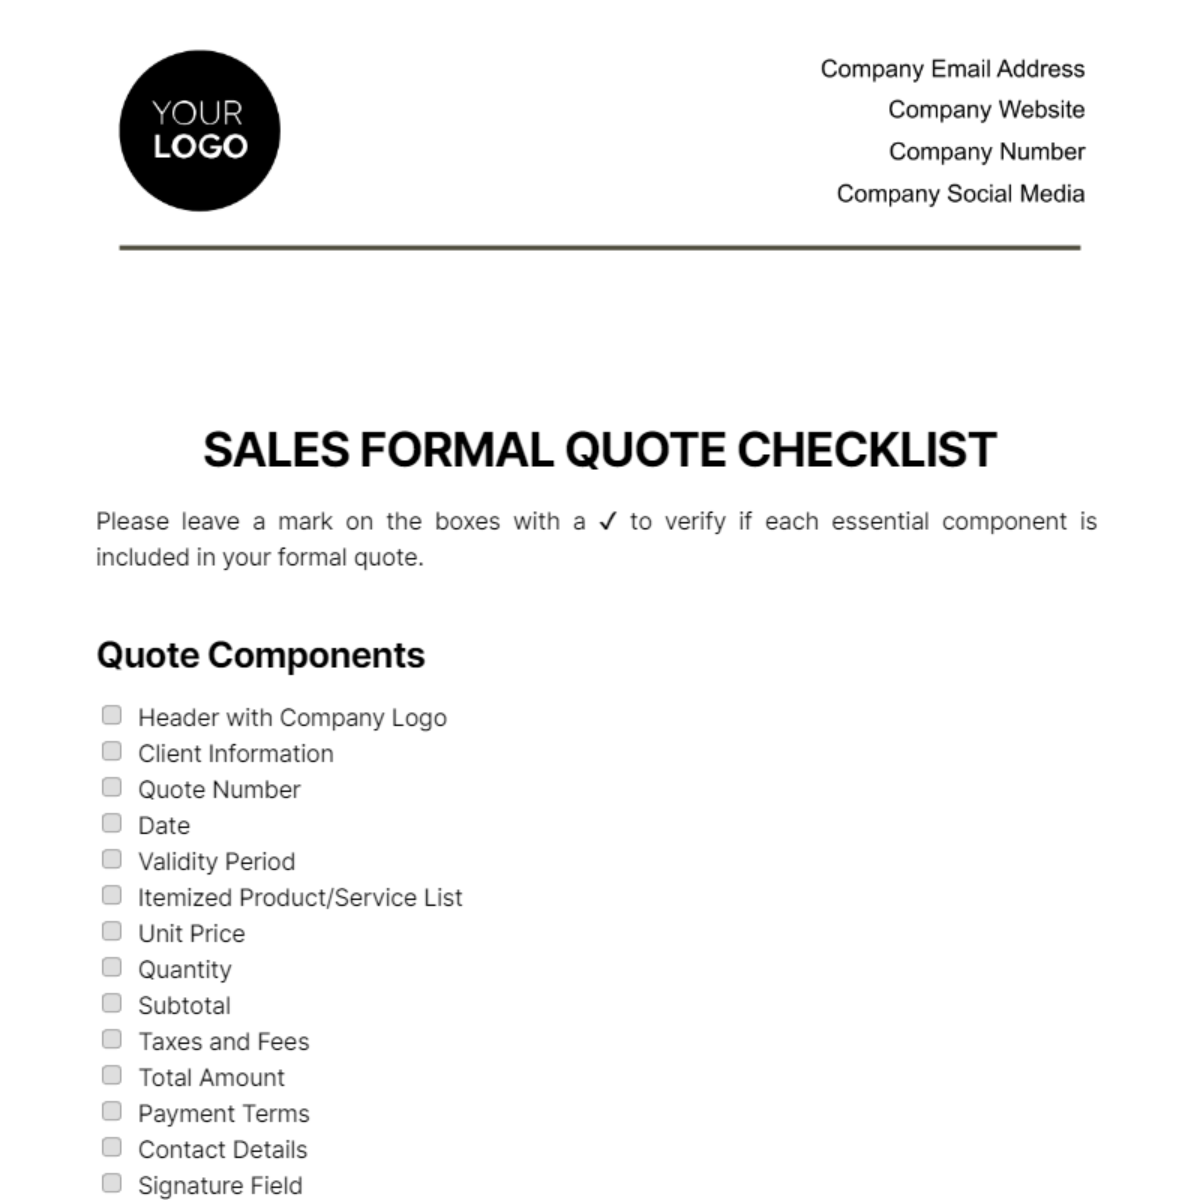 Free Sales Formal Quote Checklist Template